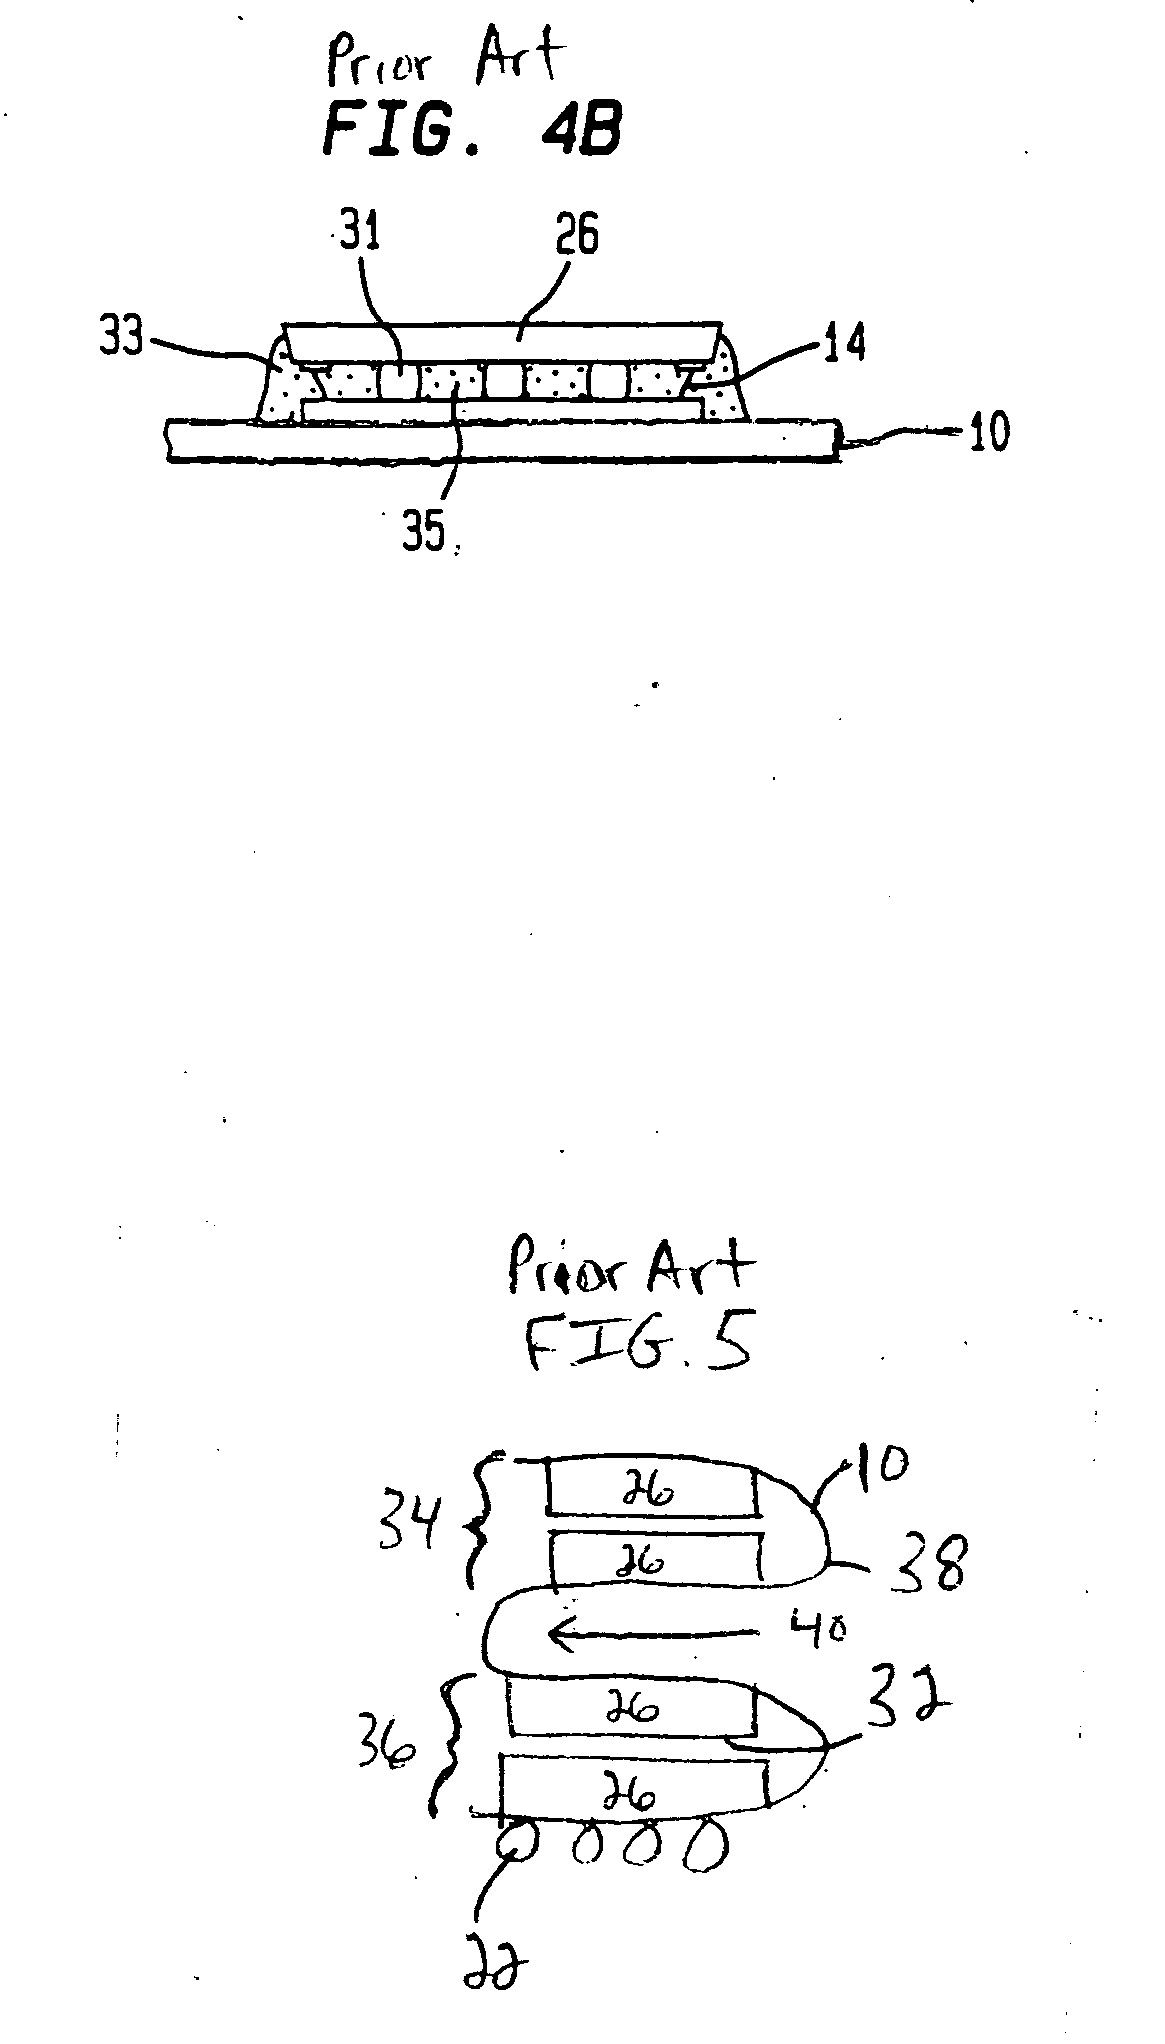 Stacked microelectronic assemblies having basal compliant layers